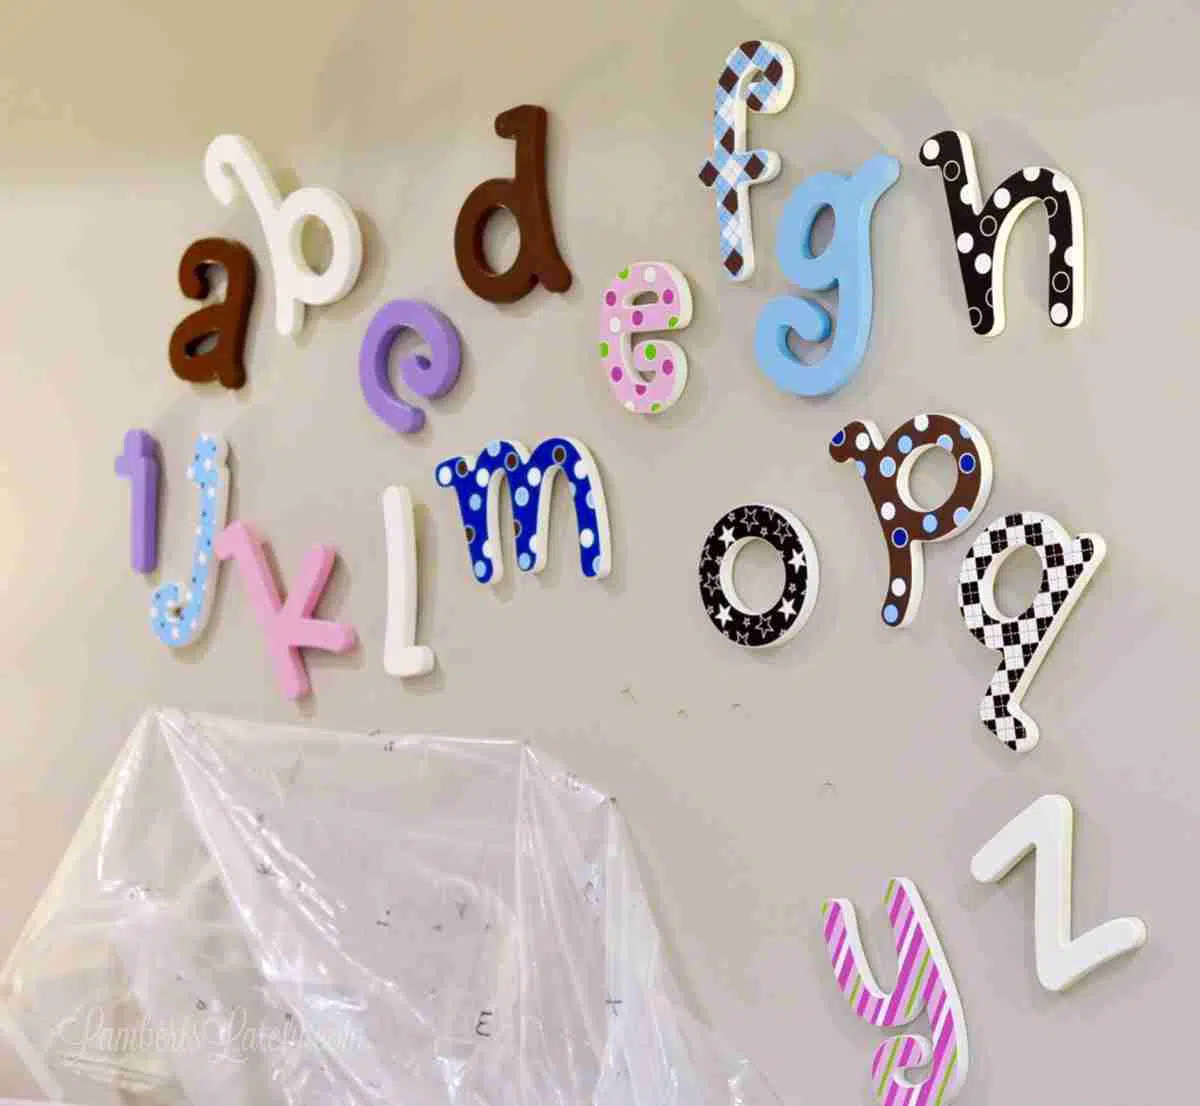 method for hanging wall letters that uses a drop cloth.